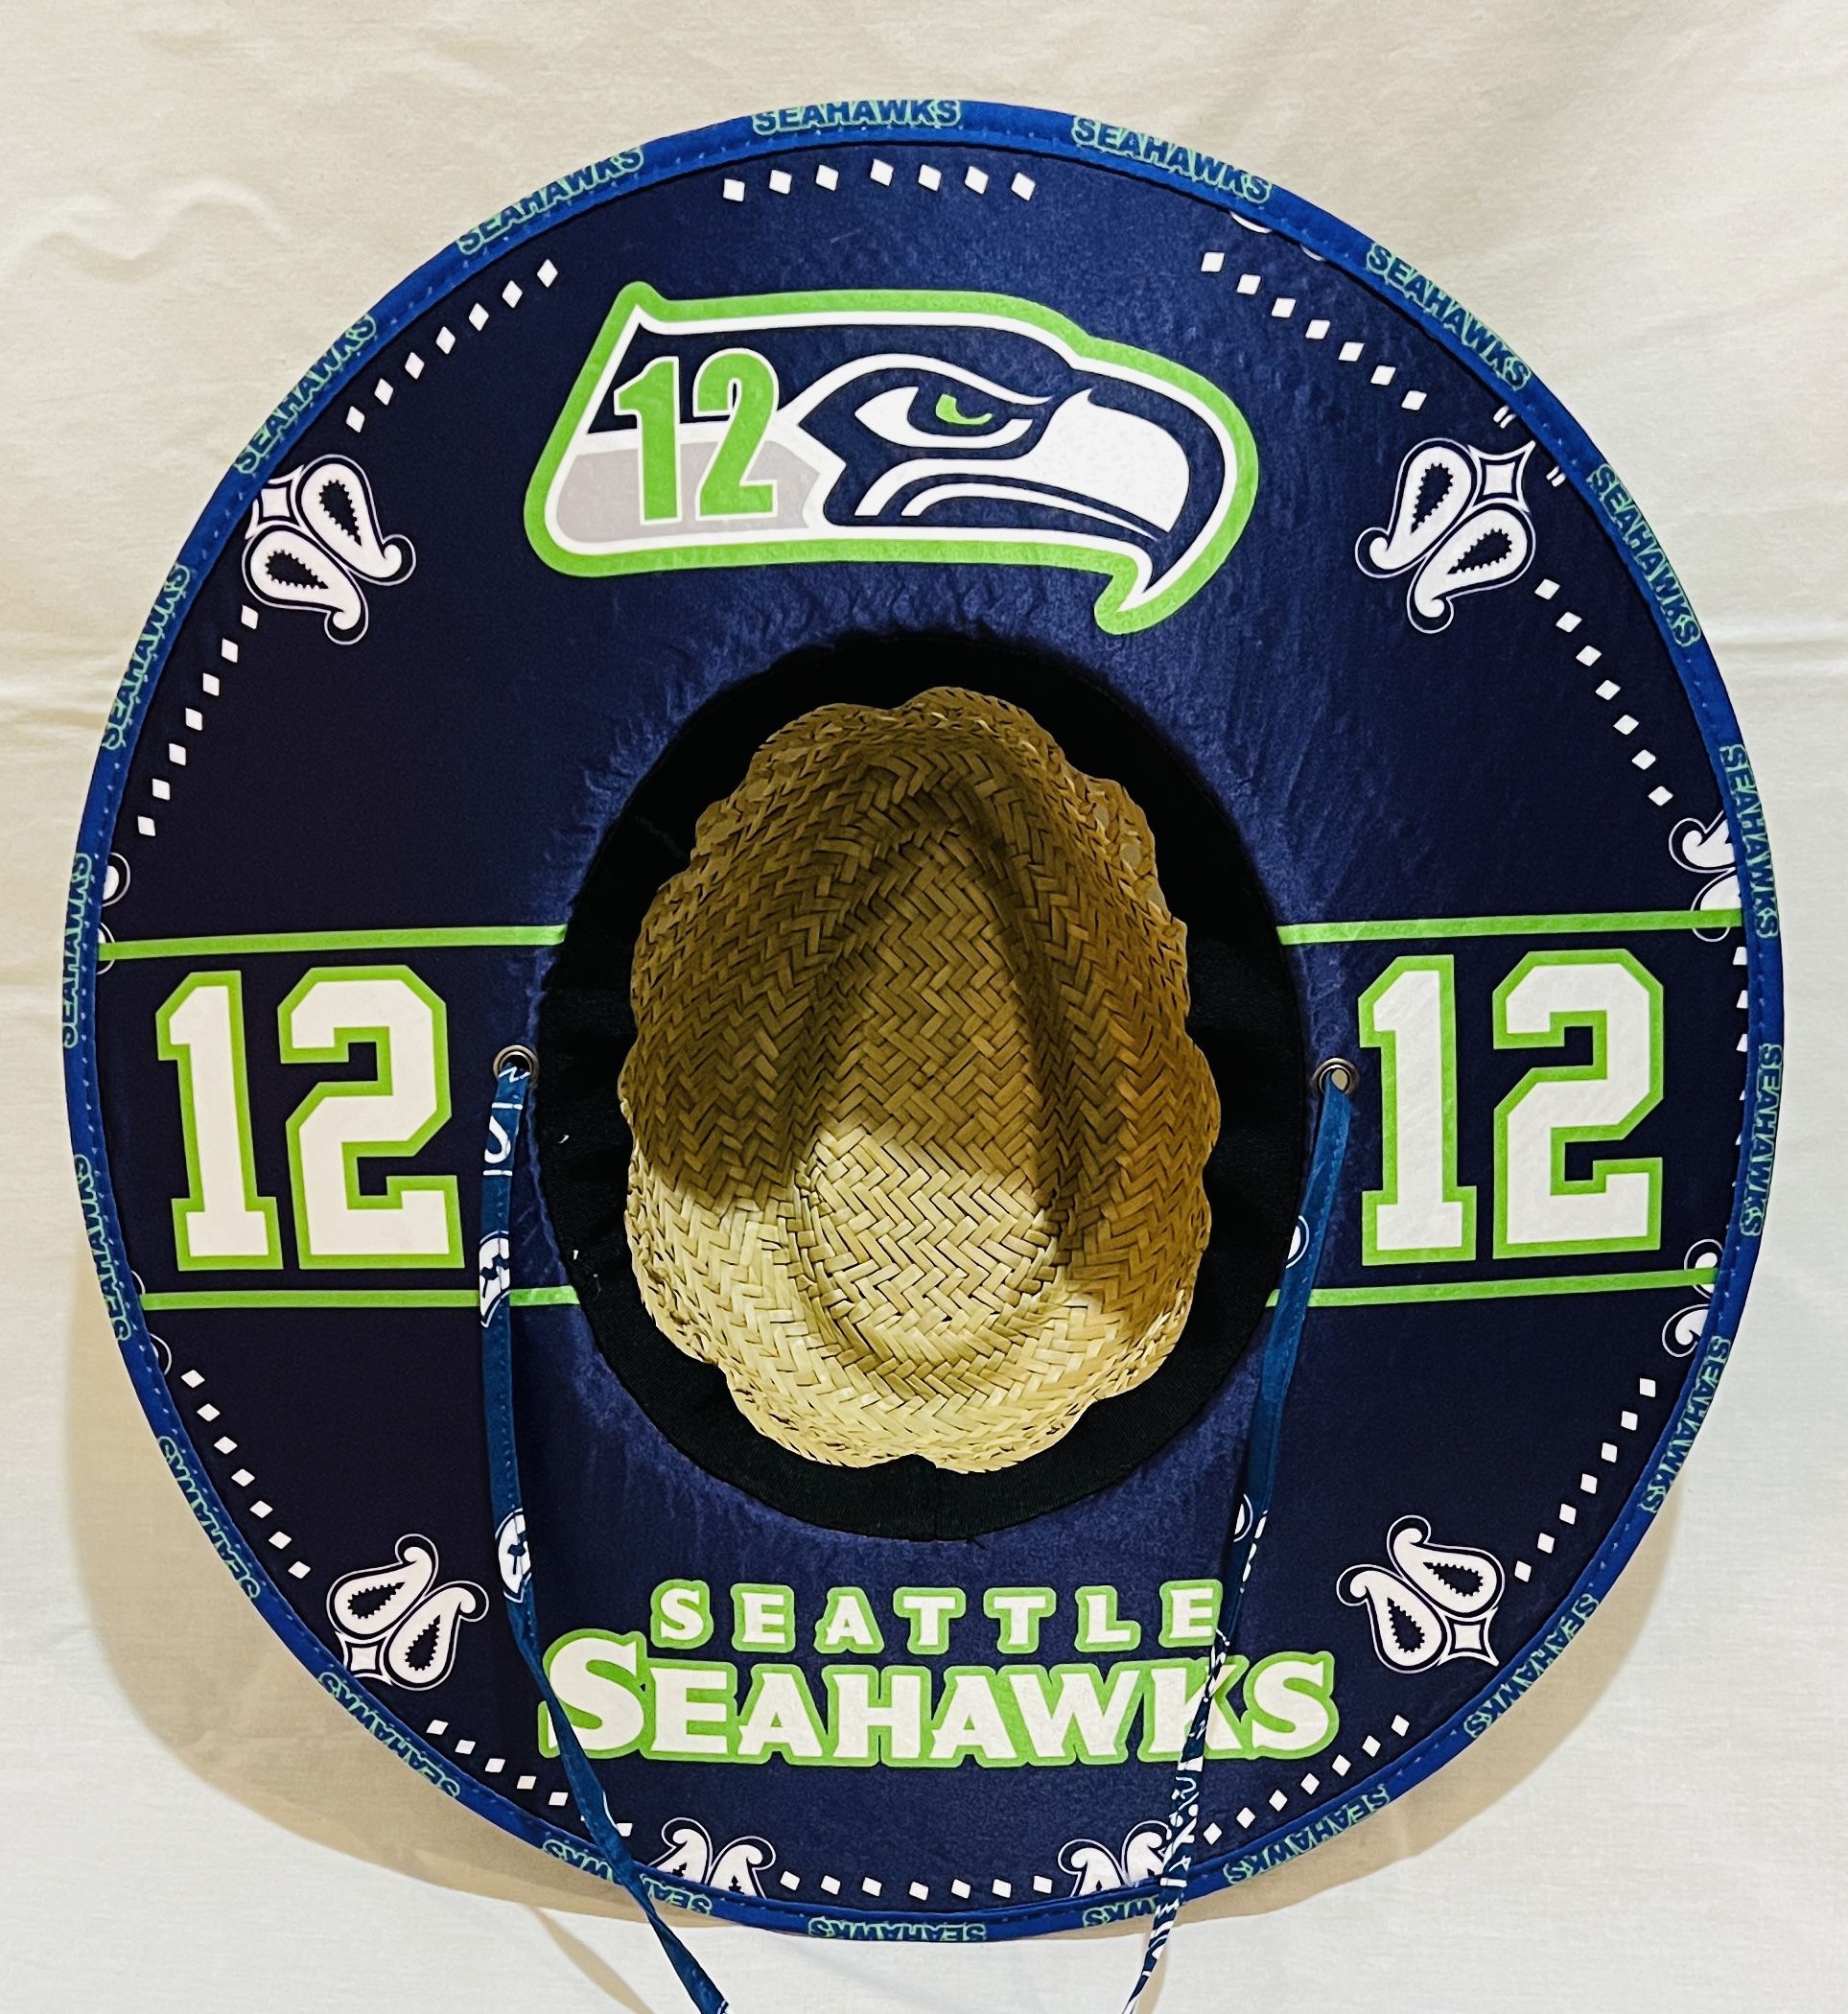 Seattle Seahawks Straw hat great gift 🎁 order now (I also have other Teams)